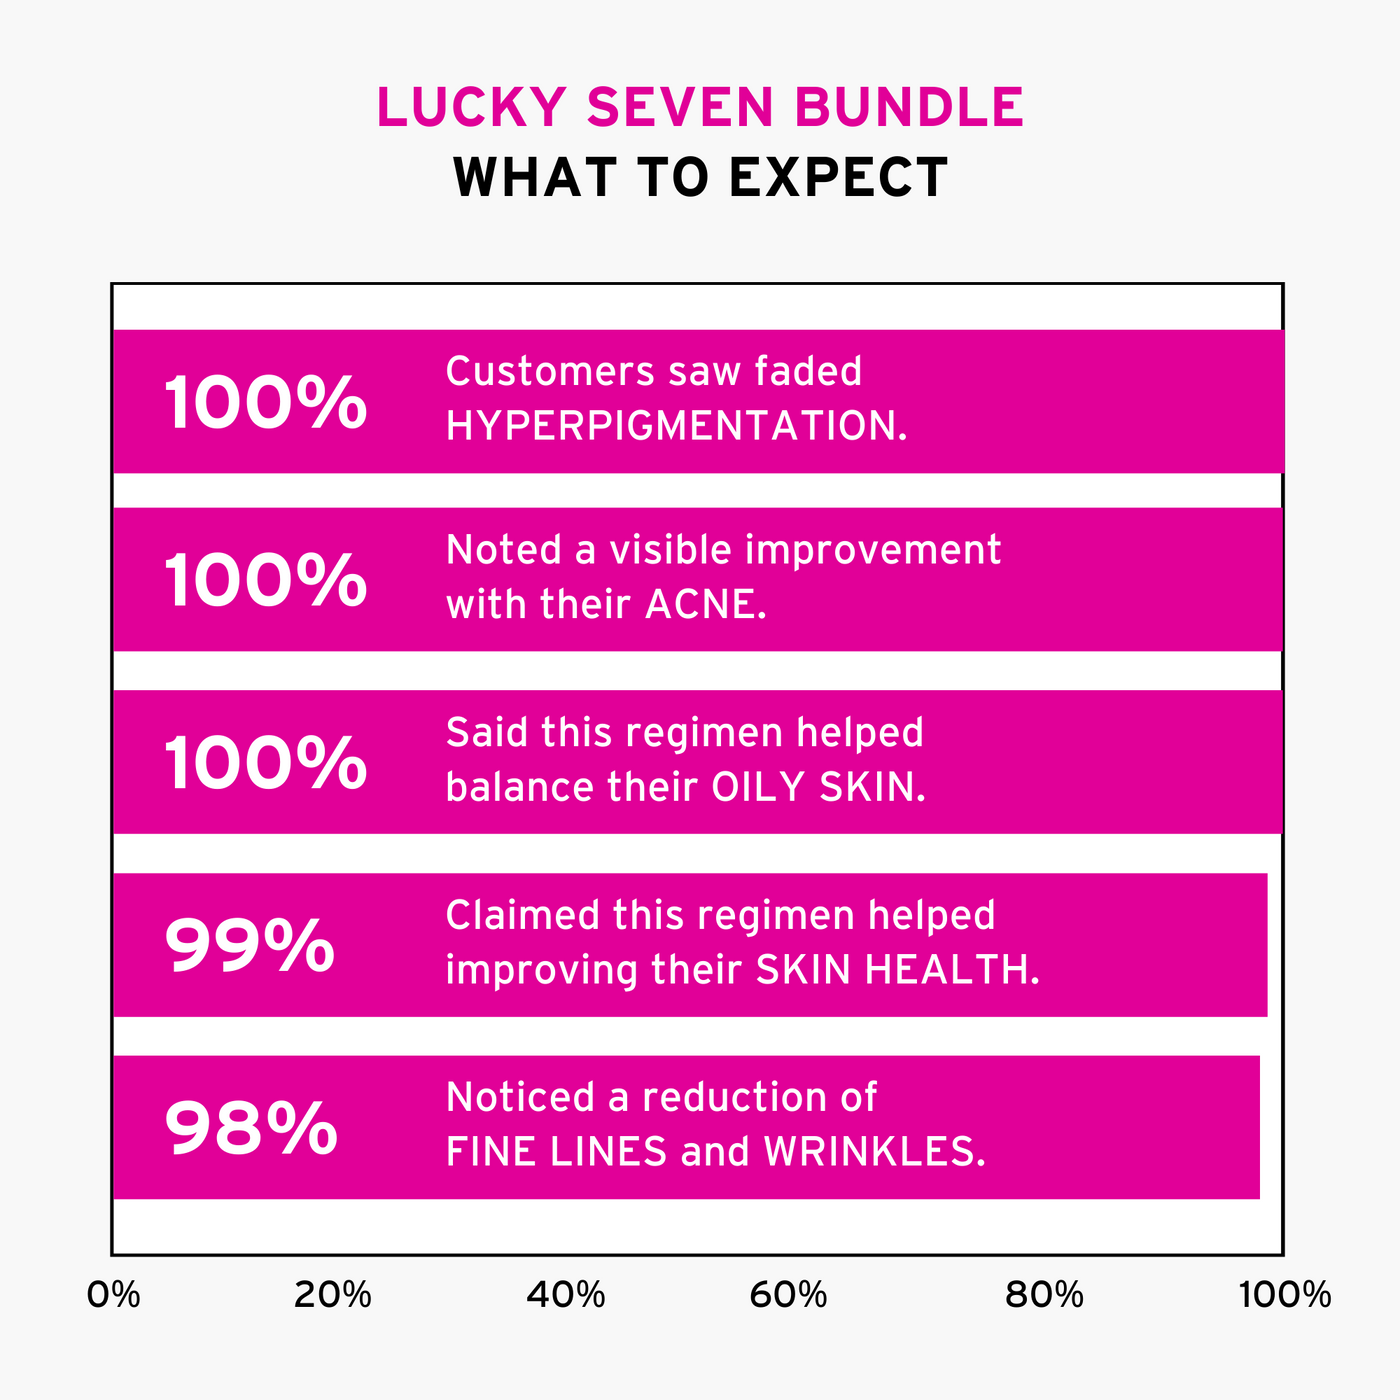 Lucky Seven for $99 (Next 5 Customers)